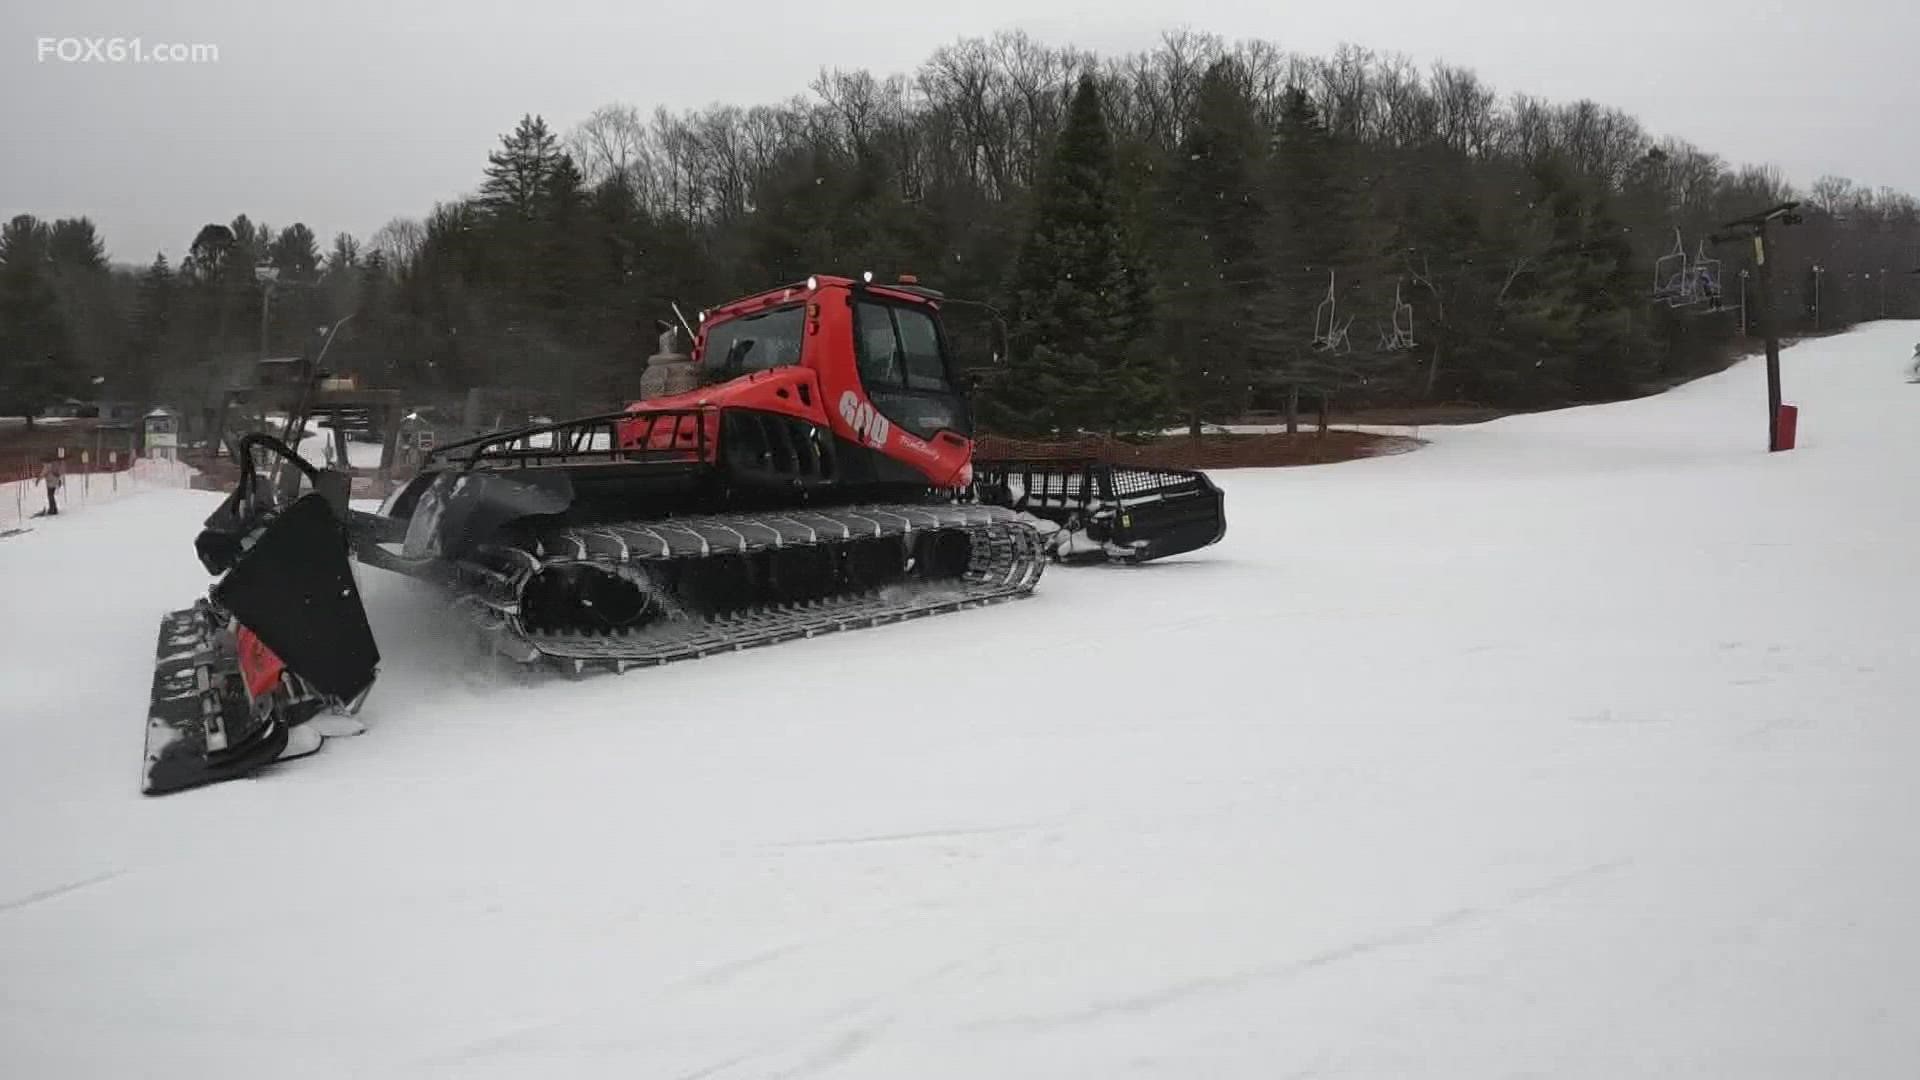 This year's winter has been short on snow, so they've had to invest more in technology.